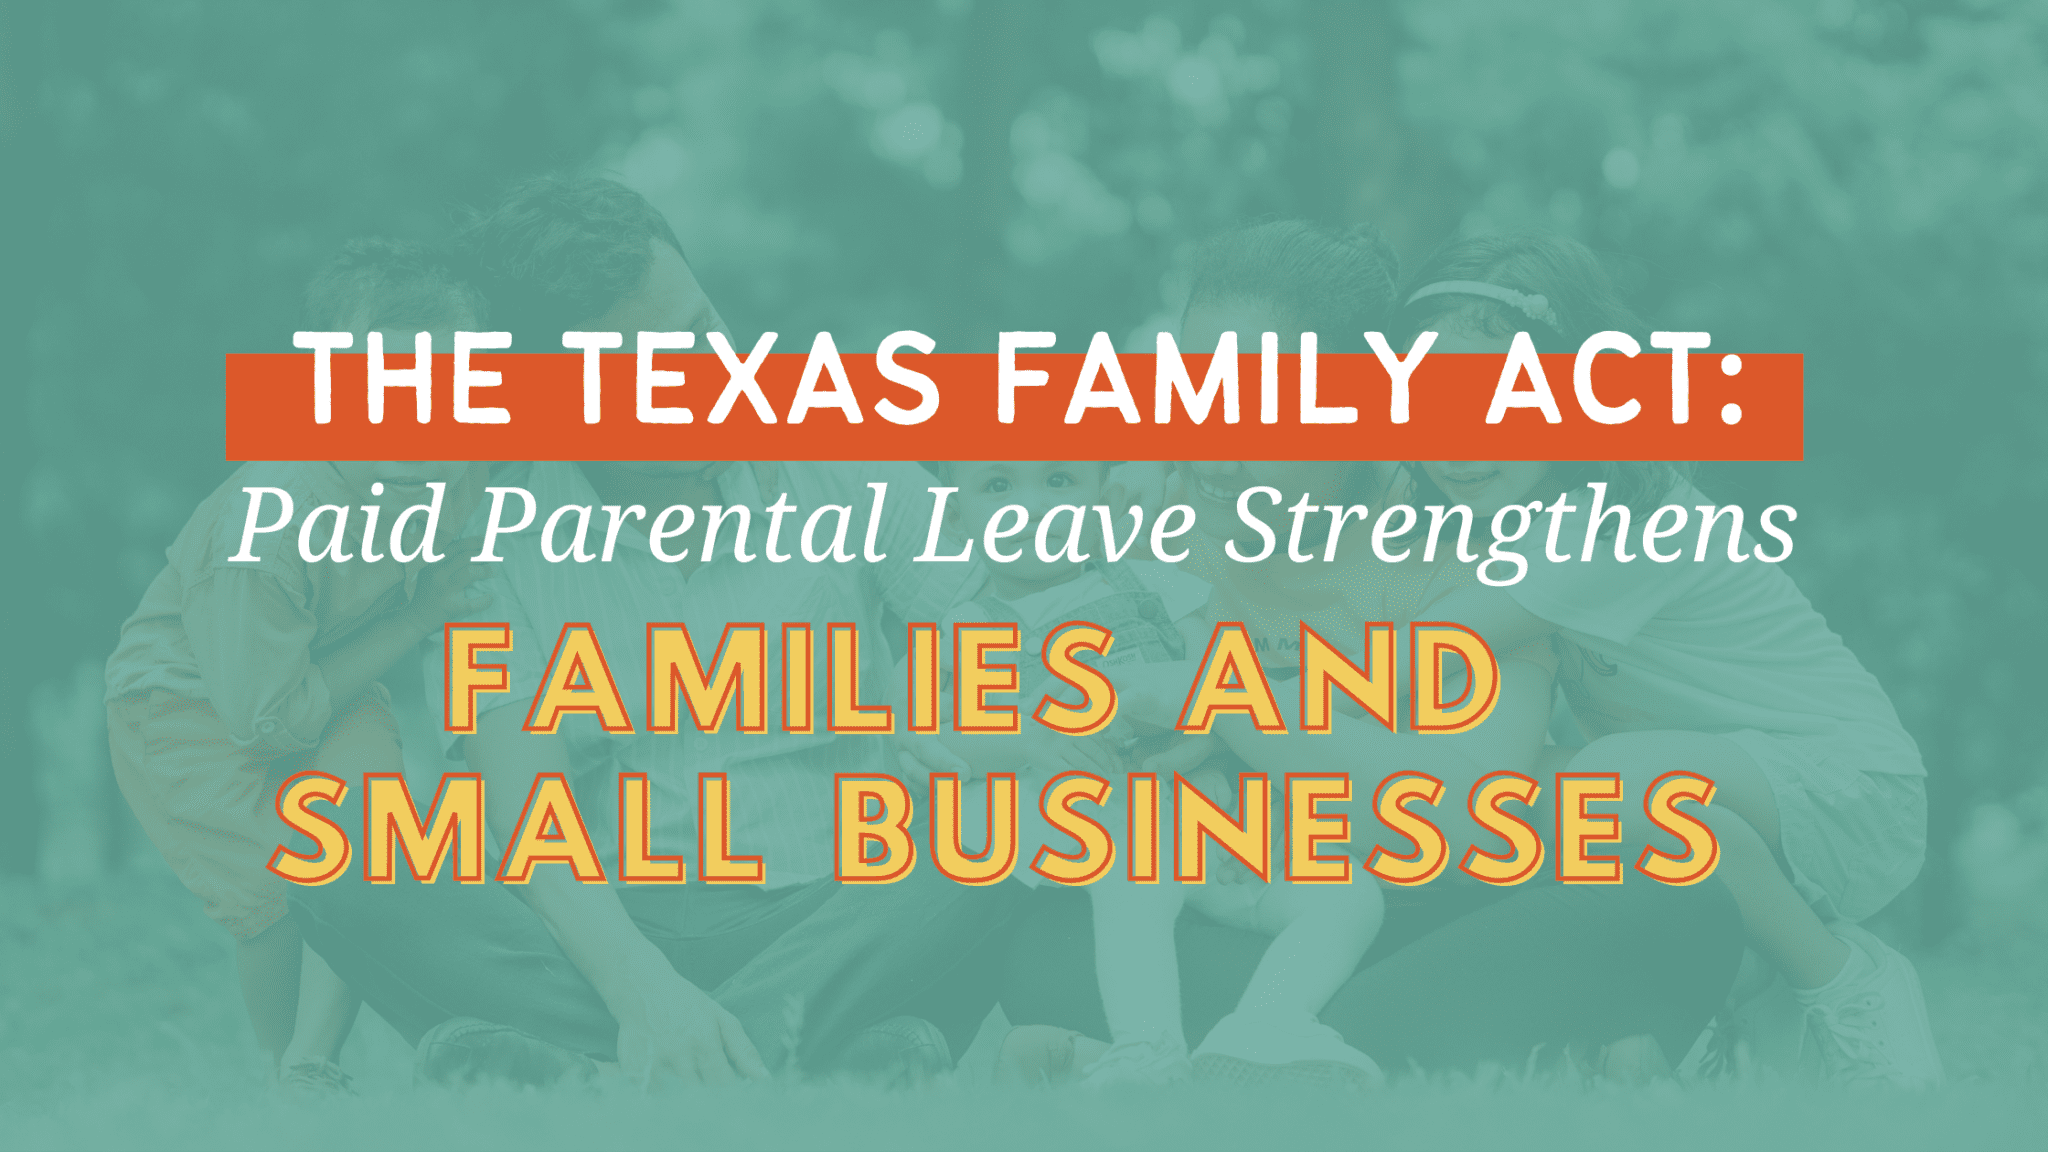 The Texas Family Act Paid Parental Leave Strengthens Families and